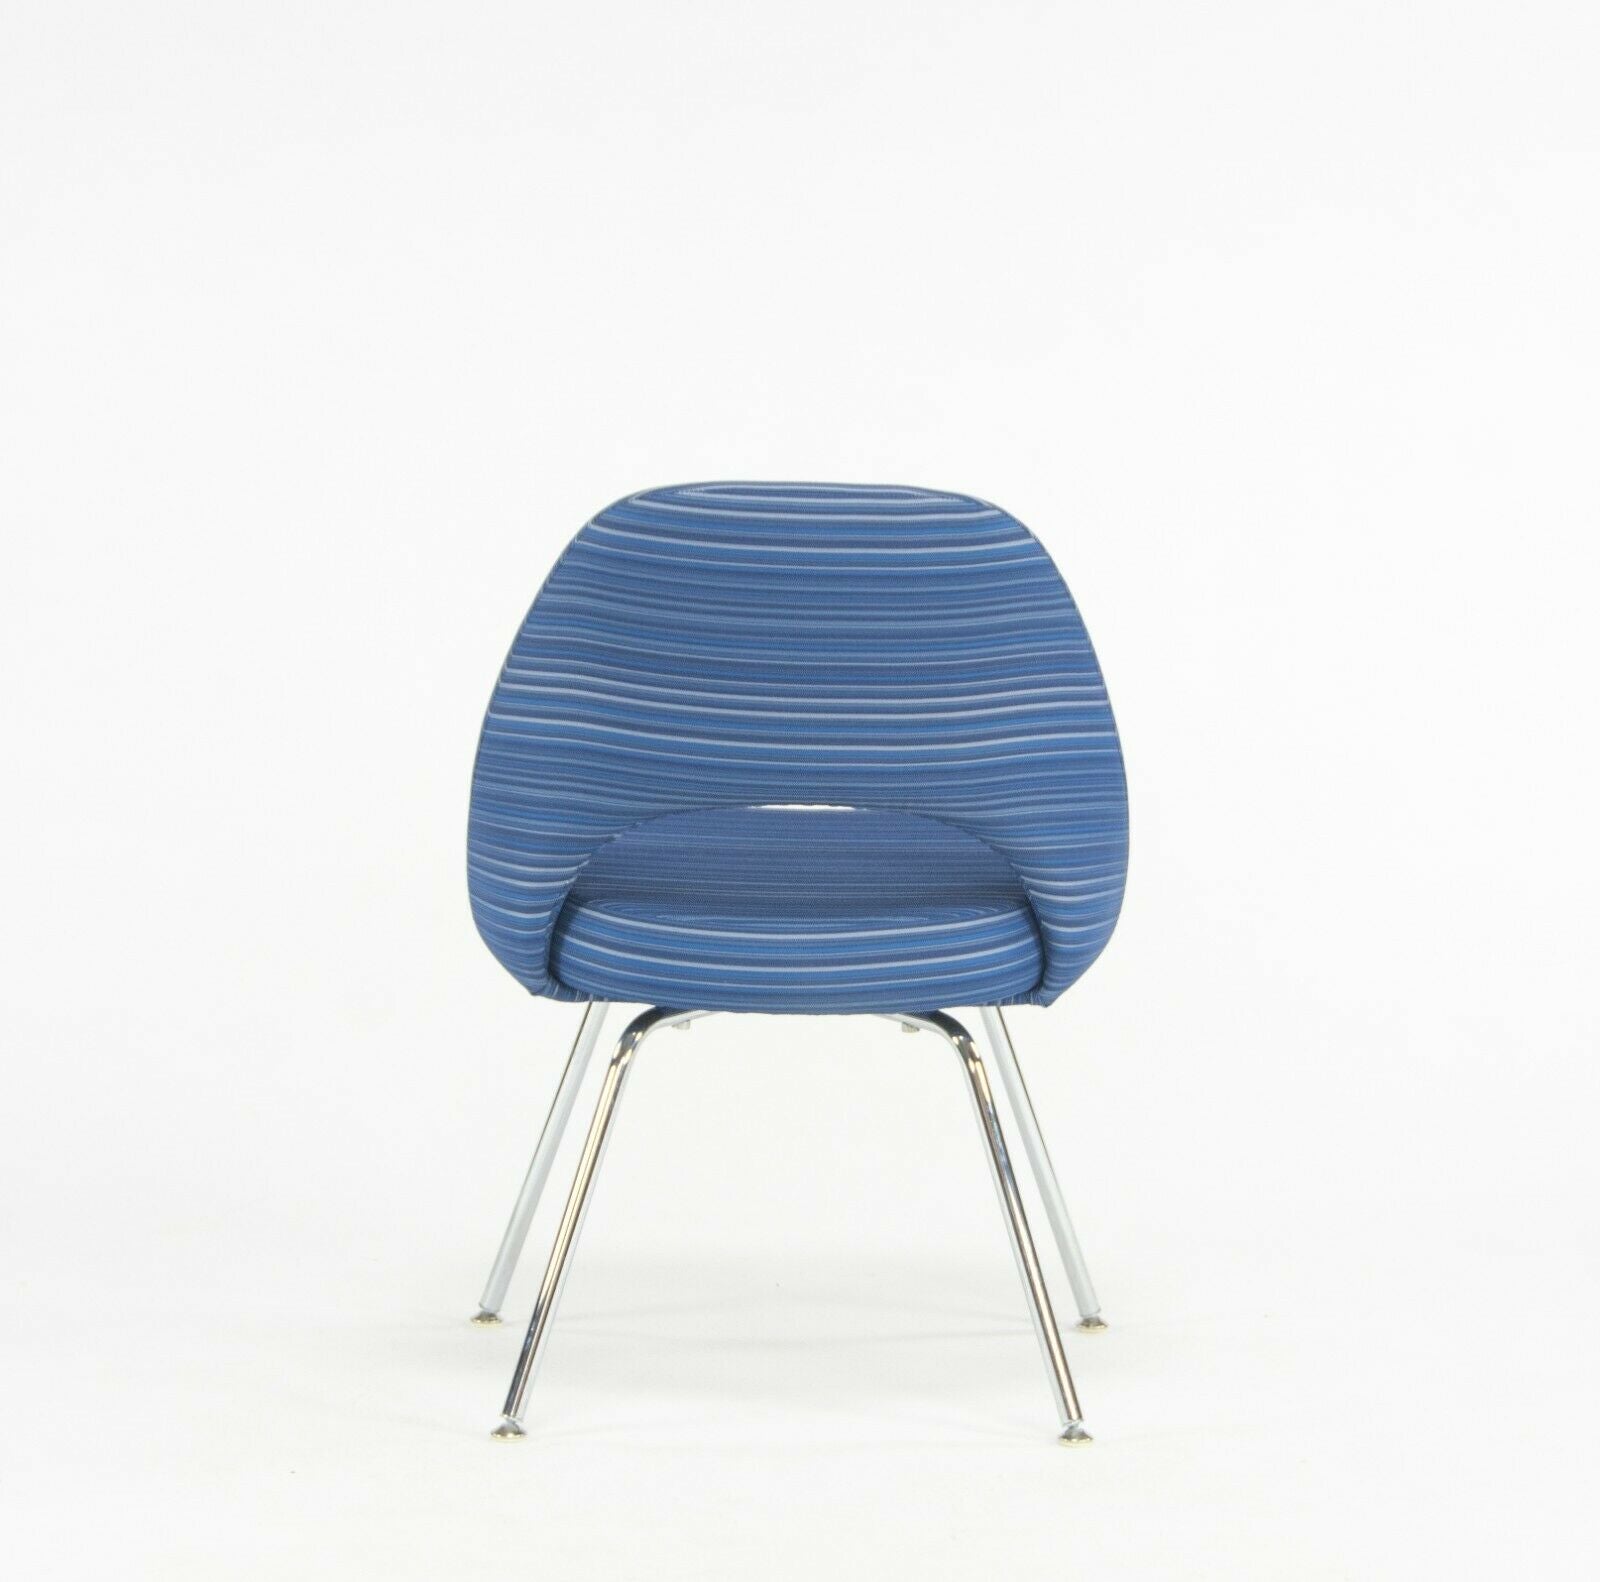 SOLD 2020 6x Eero Saarinen for Knoll Executive Side Chair with Blue Striped Fabric